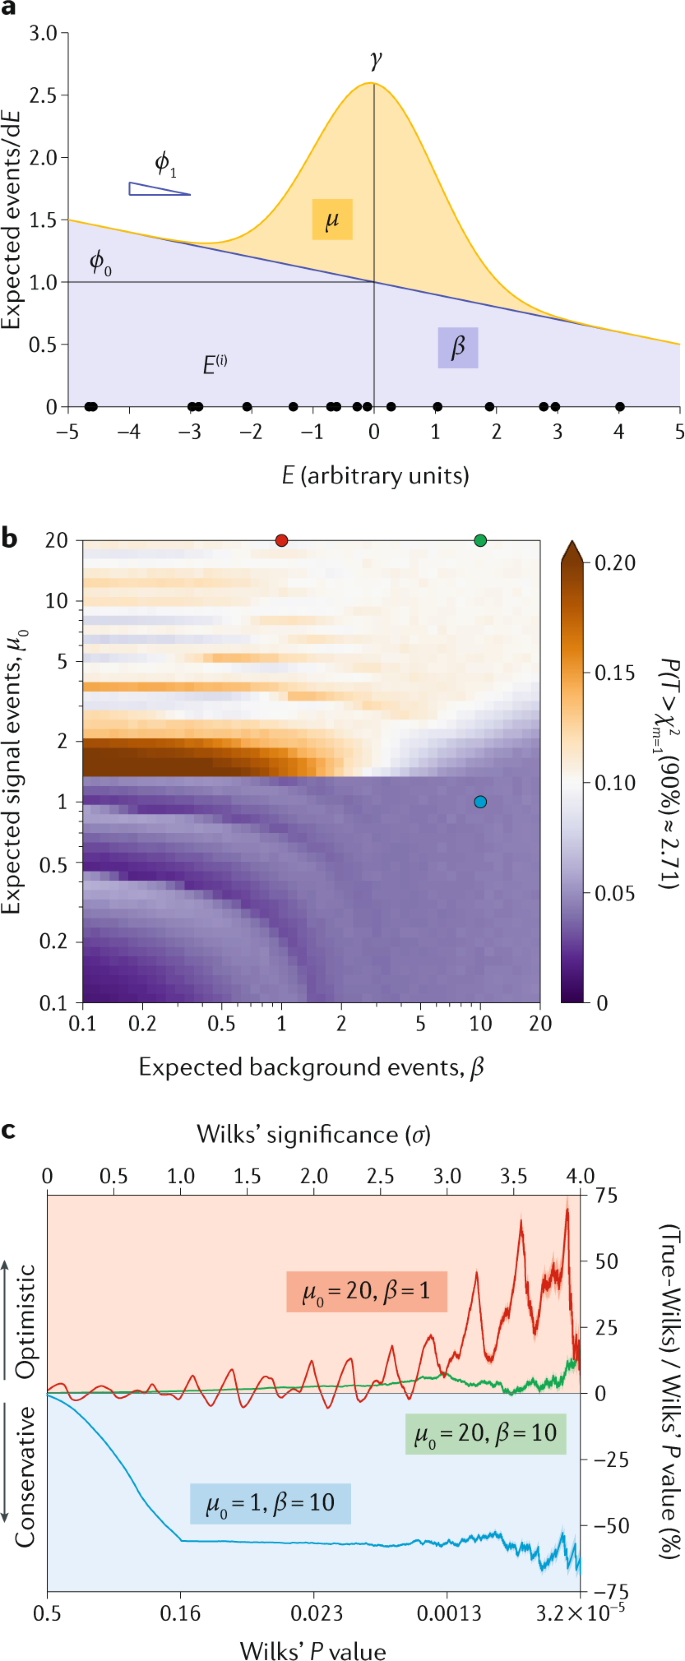 Searching For New Phenomena With Profile Likelihood Ratio Tests Nature Reviews Physics